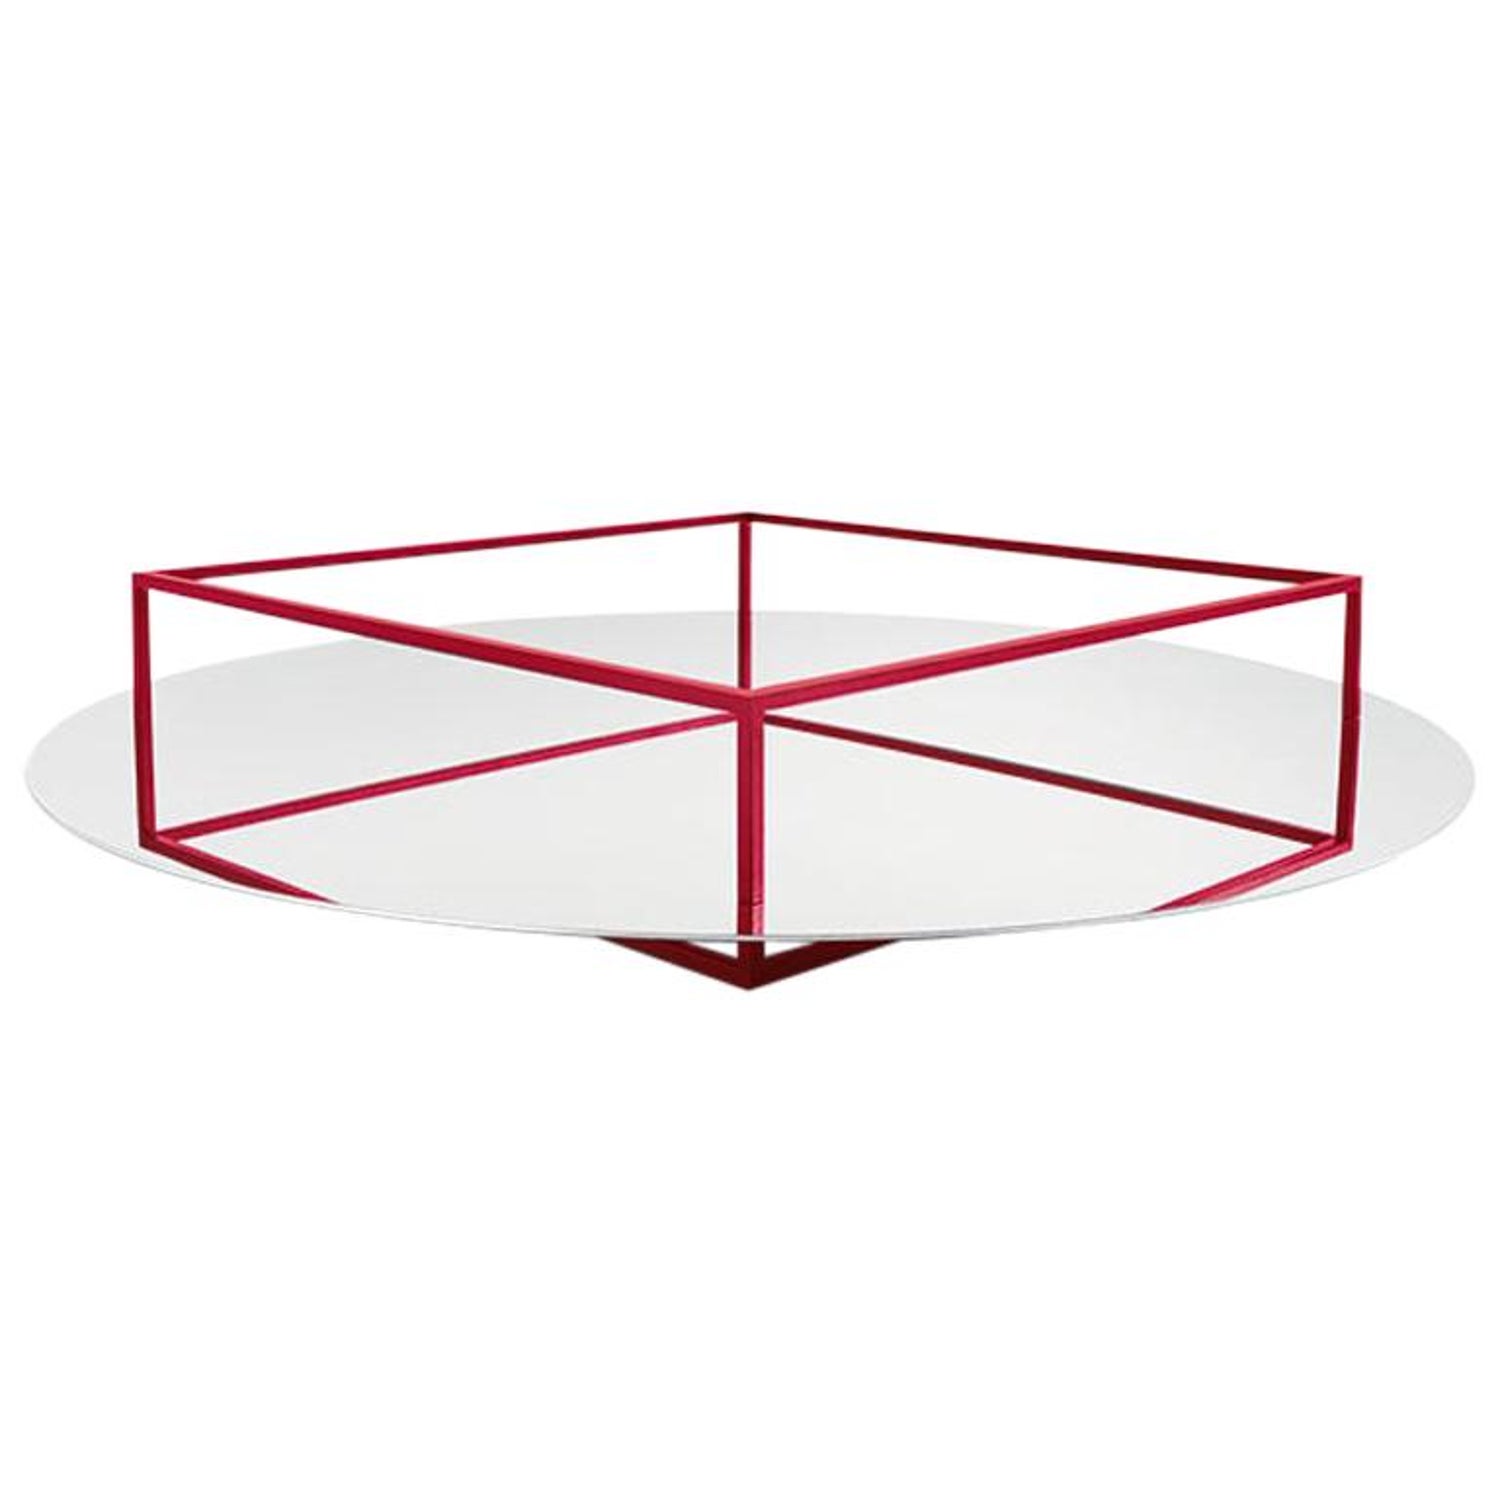 Danese Milano Surface + Border No. 1 Tray or Fruit Bowl in Red by Ron Gilad  For Sale at 1stDibs